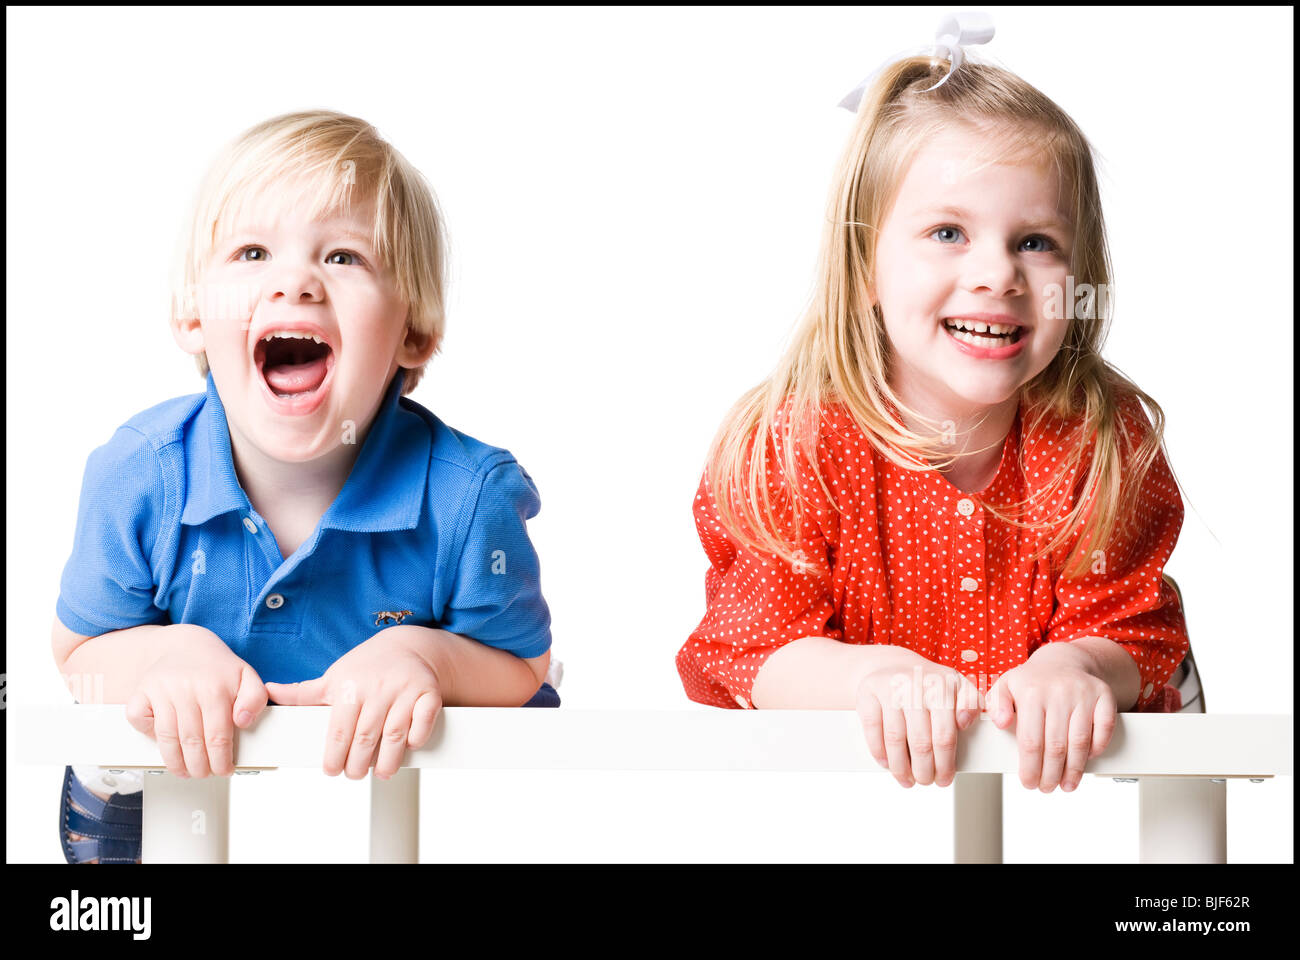 two children laughing Stock Photo